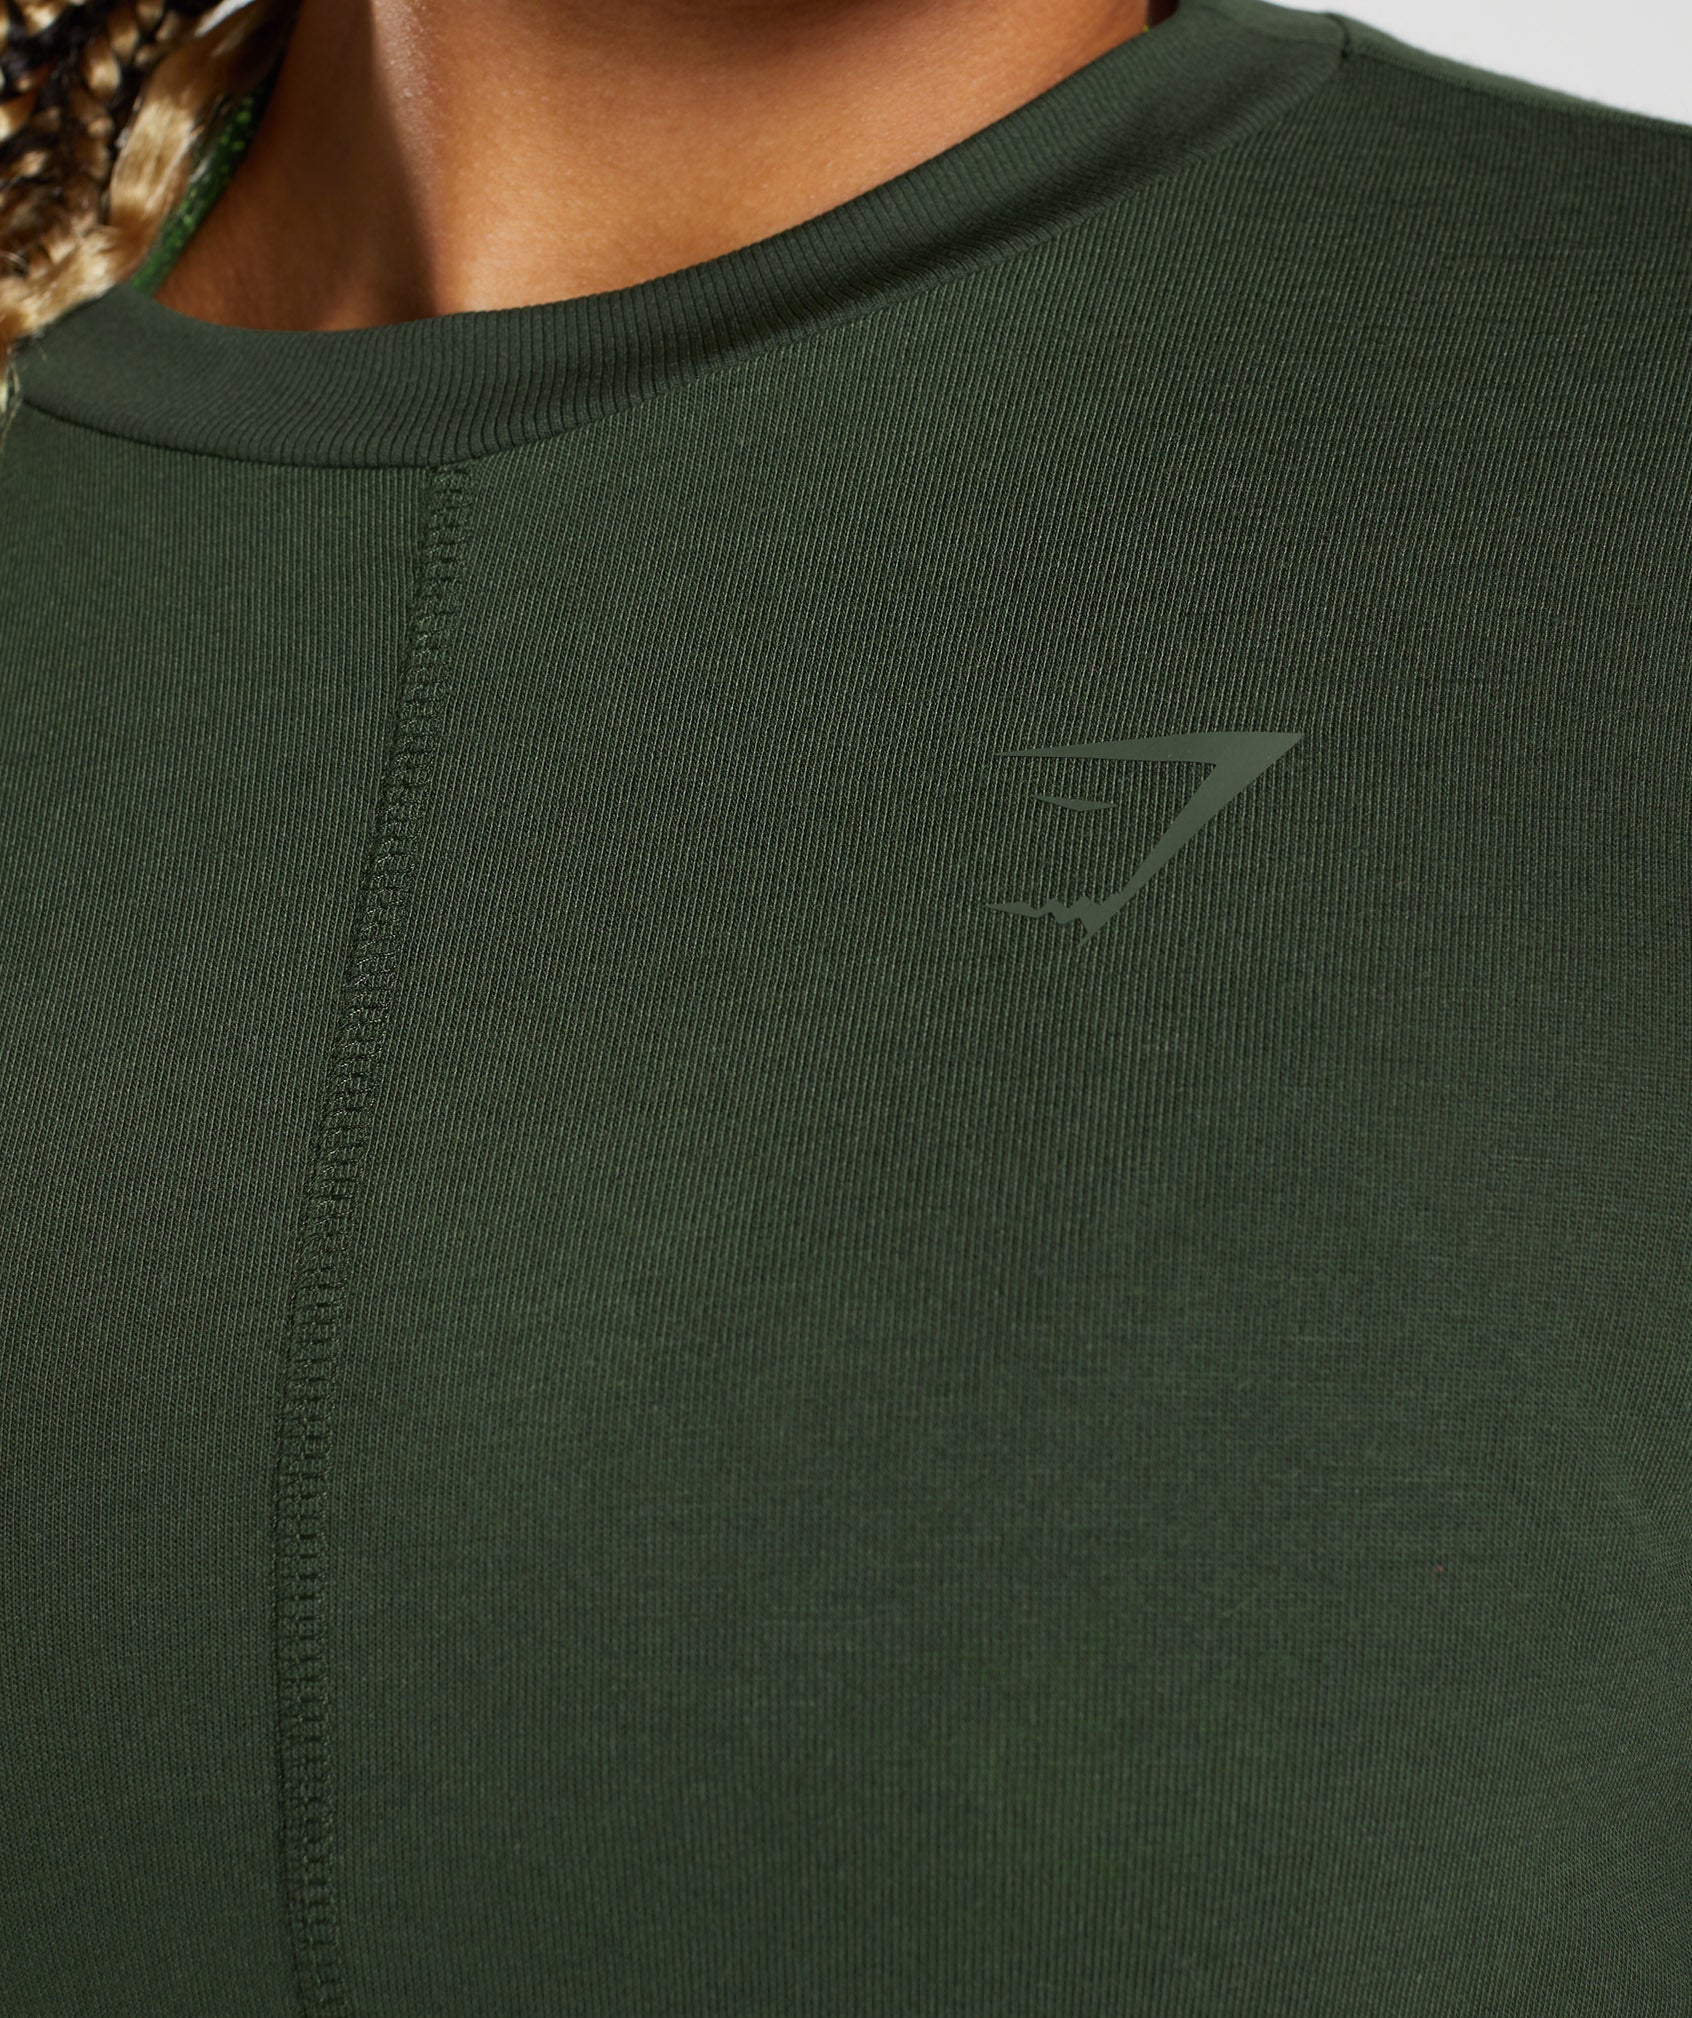 GS Power Long Sleeve T-Shirt in Moss Olive - view 5